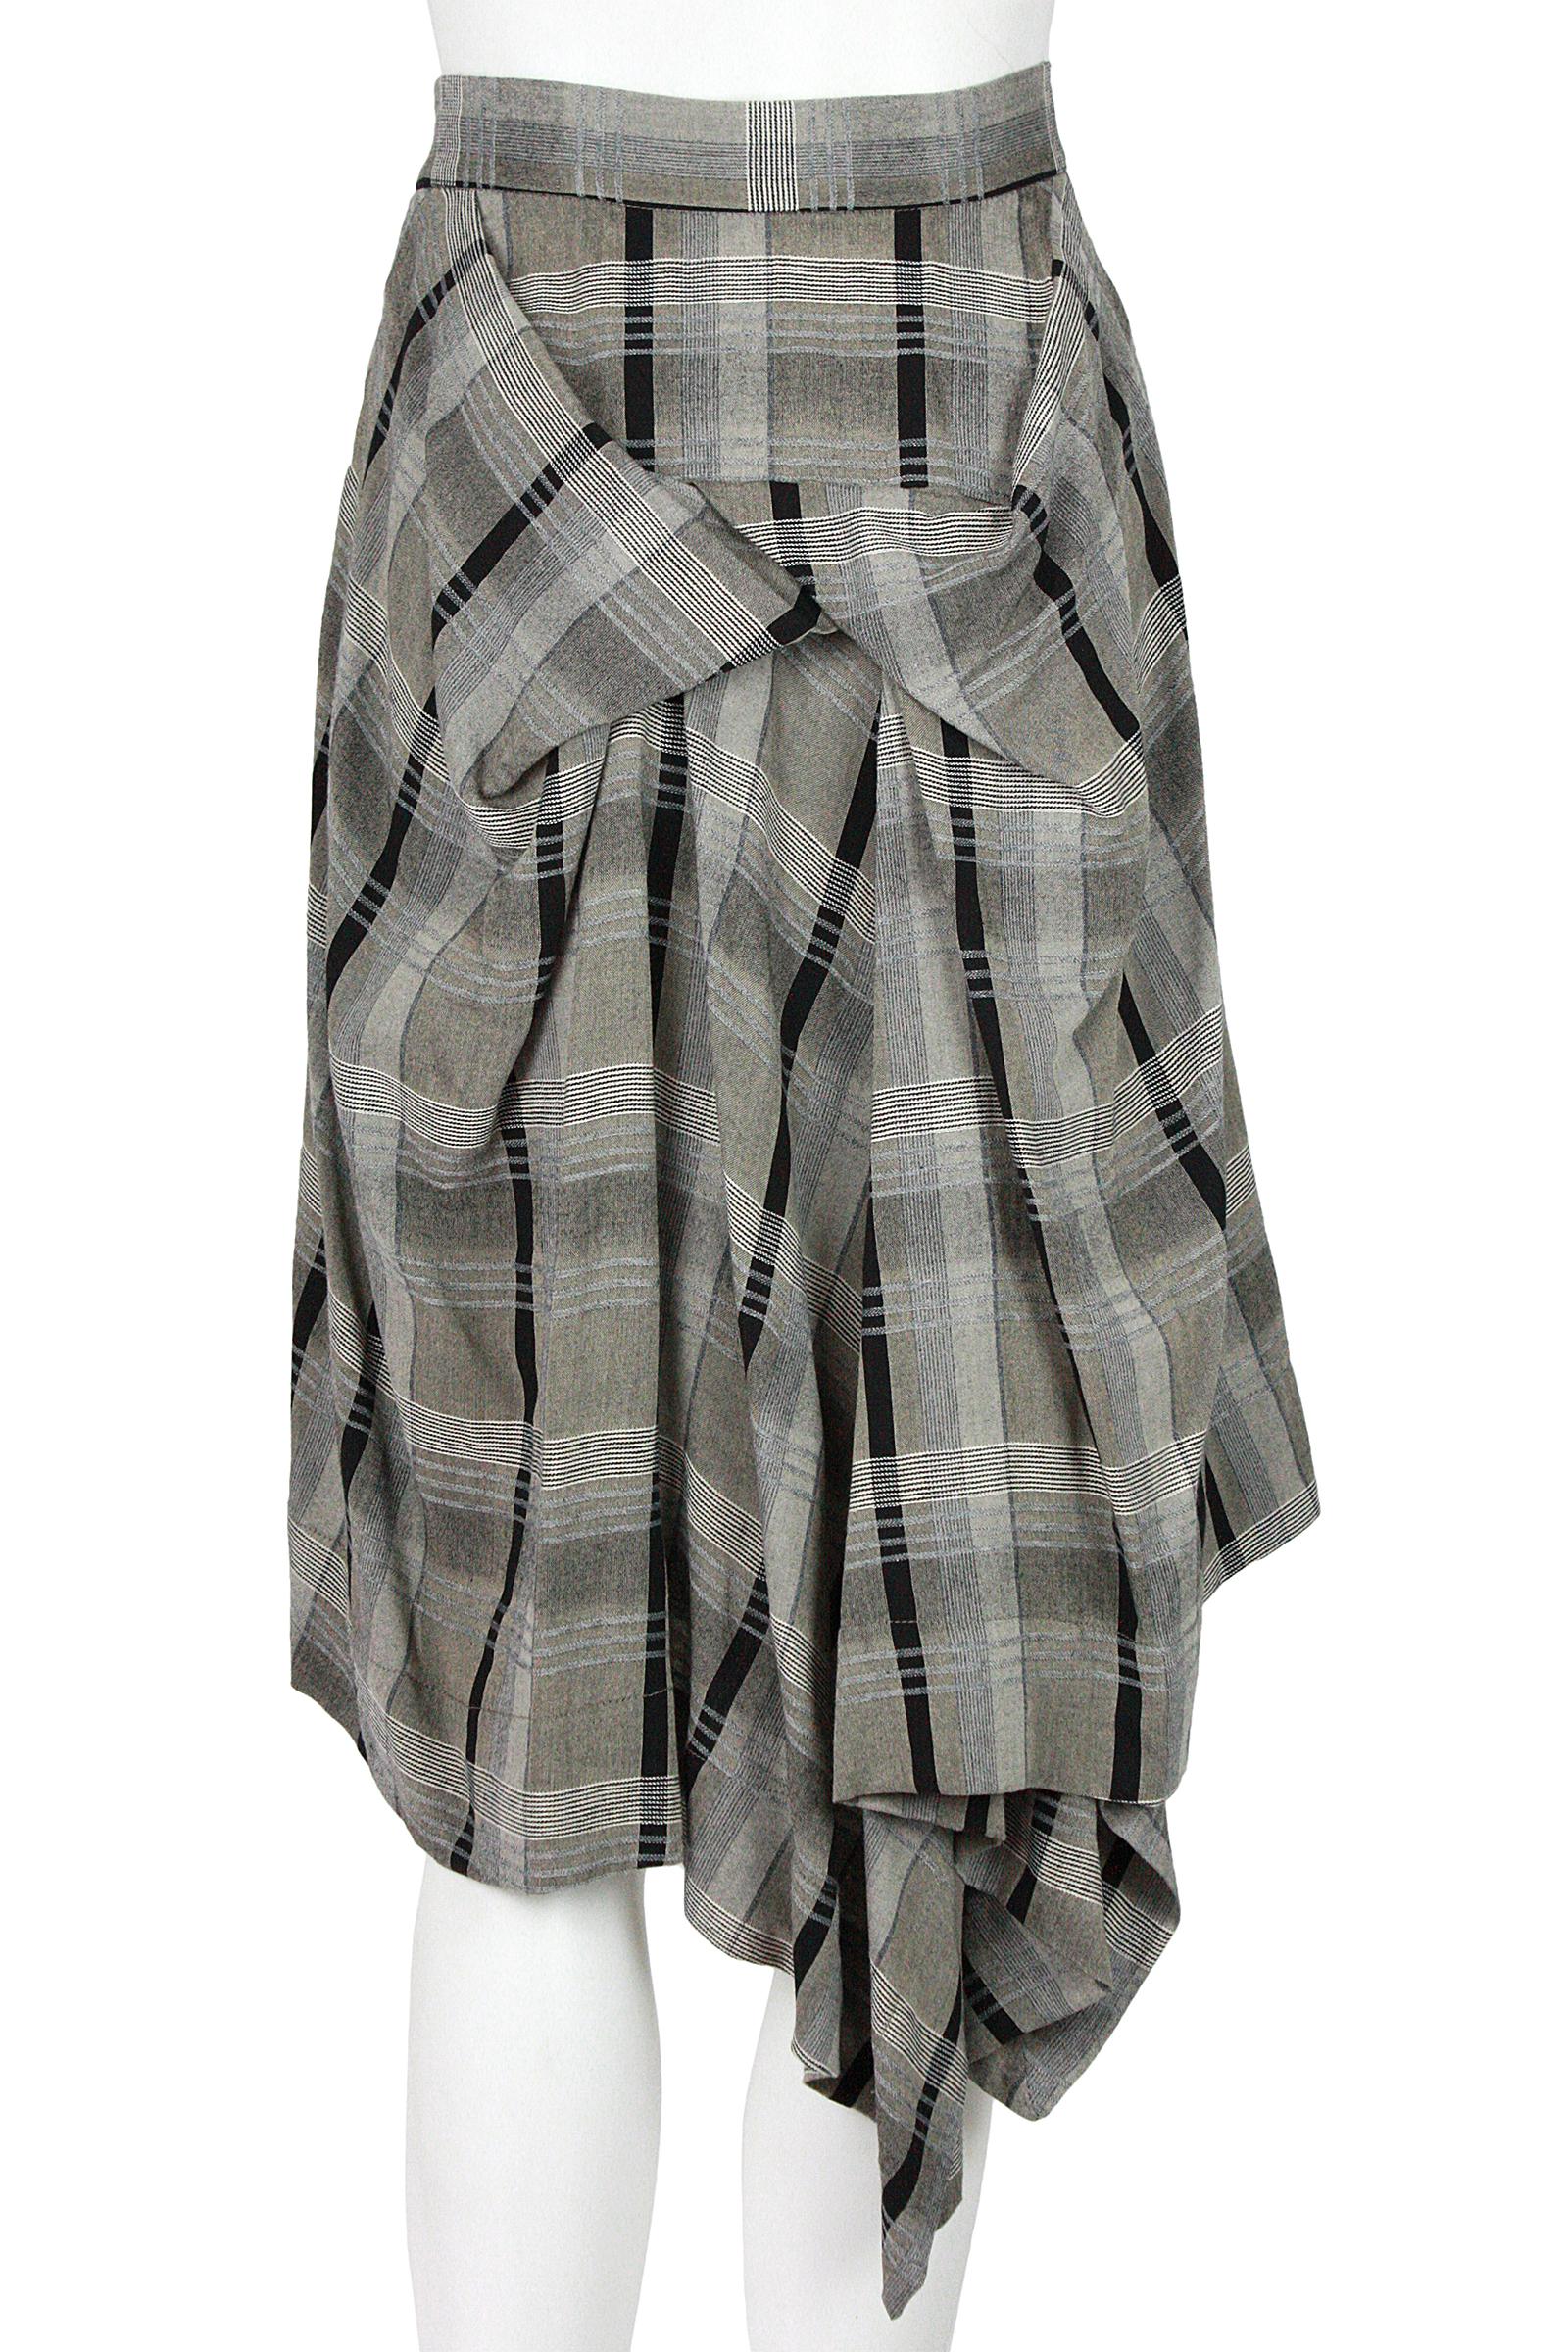 Vivienne Westwood Anglomania Grey and Black Plaid Skirt For Sale at ...